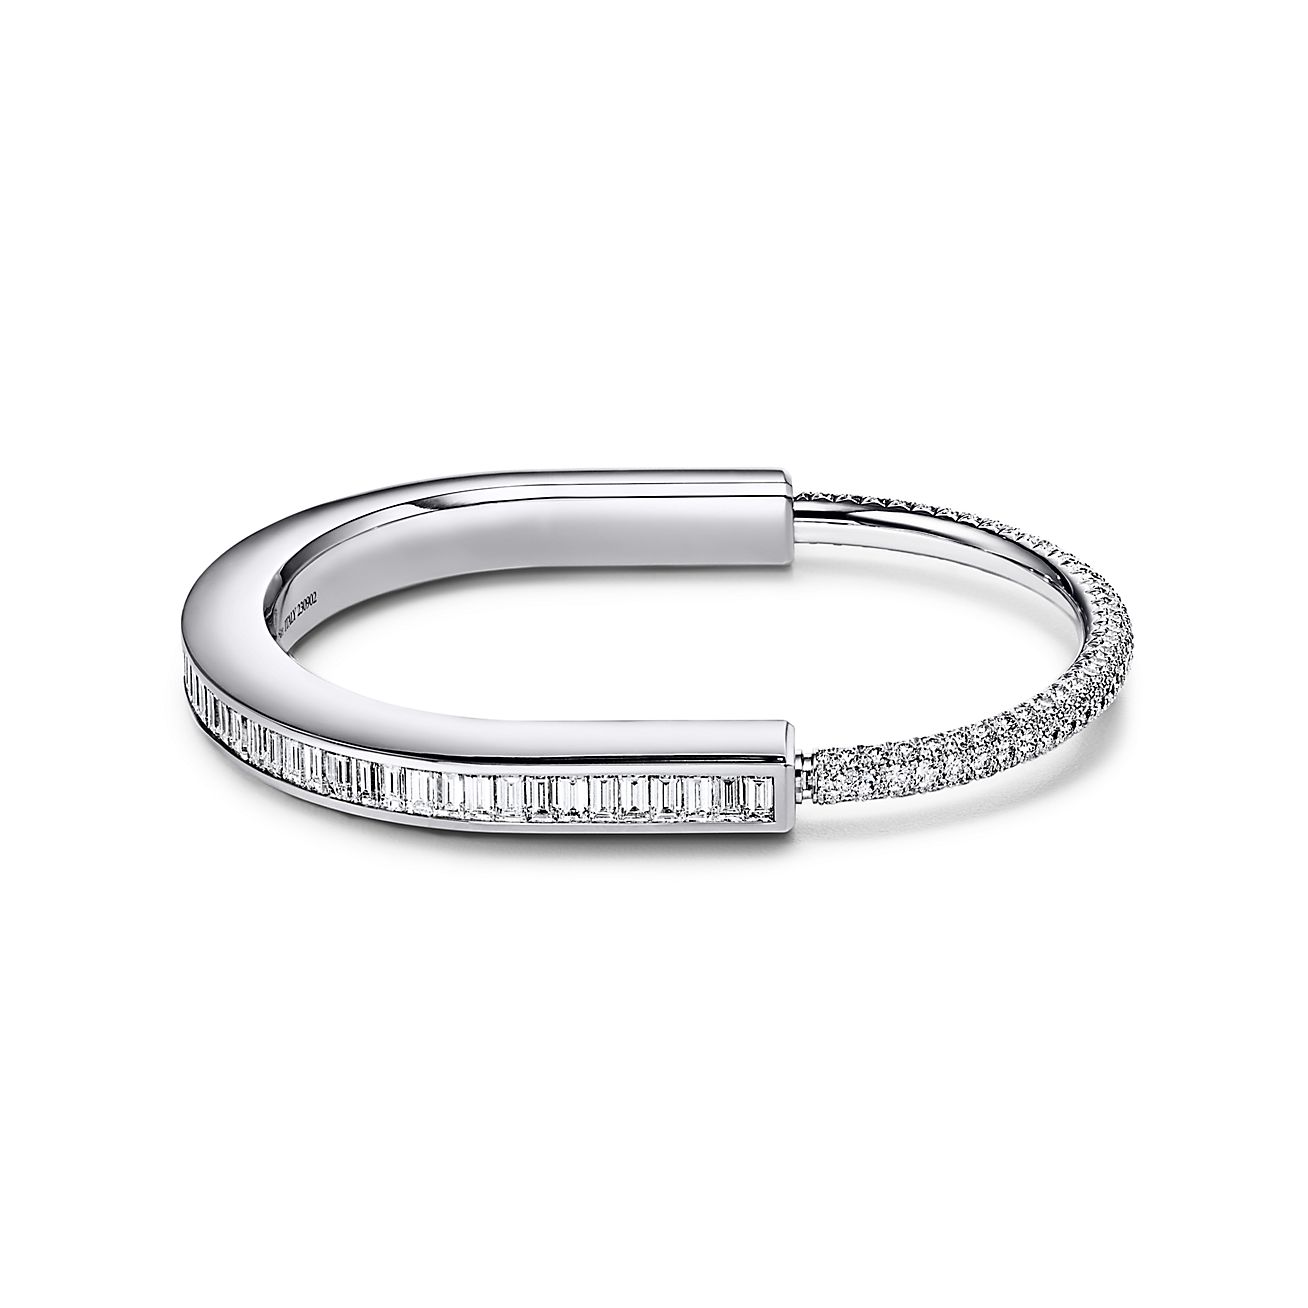 Tiffany & Co 'All Gender' Tiffany Lock Bracelets | 'No Rules. All Welcome'  — Anne of Carversville | Tiffany and co bracelet, Tiffany and co jewelry, Tiffany  bracelets